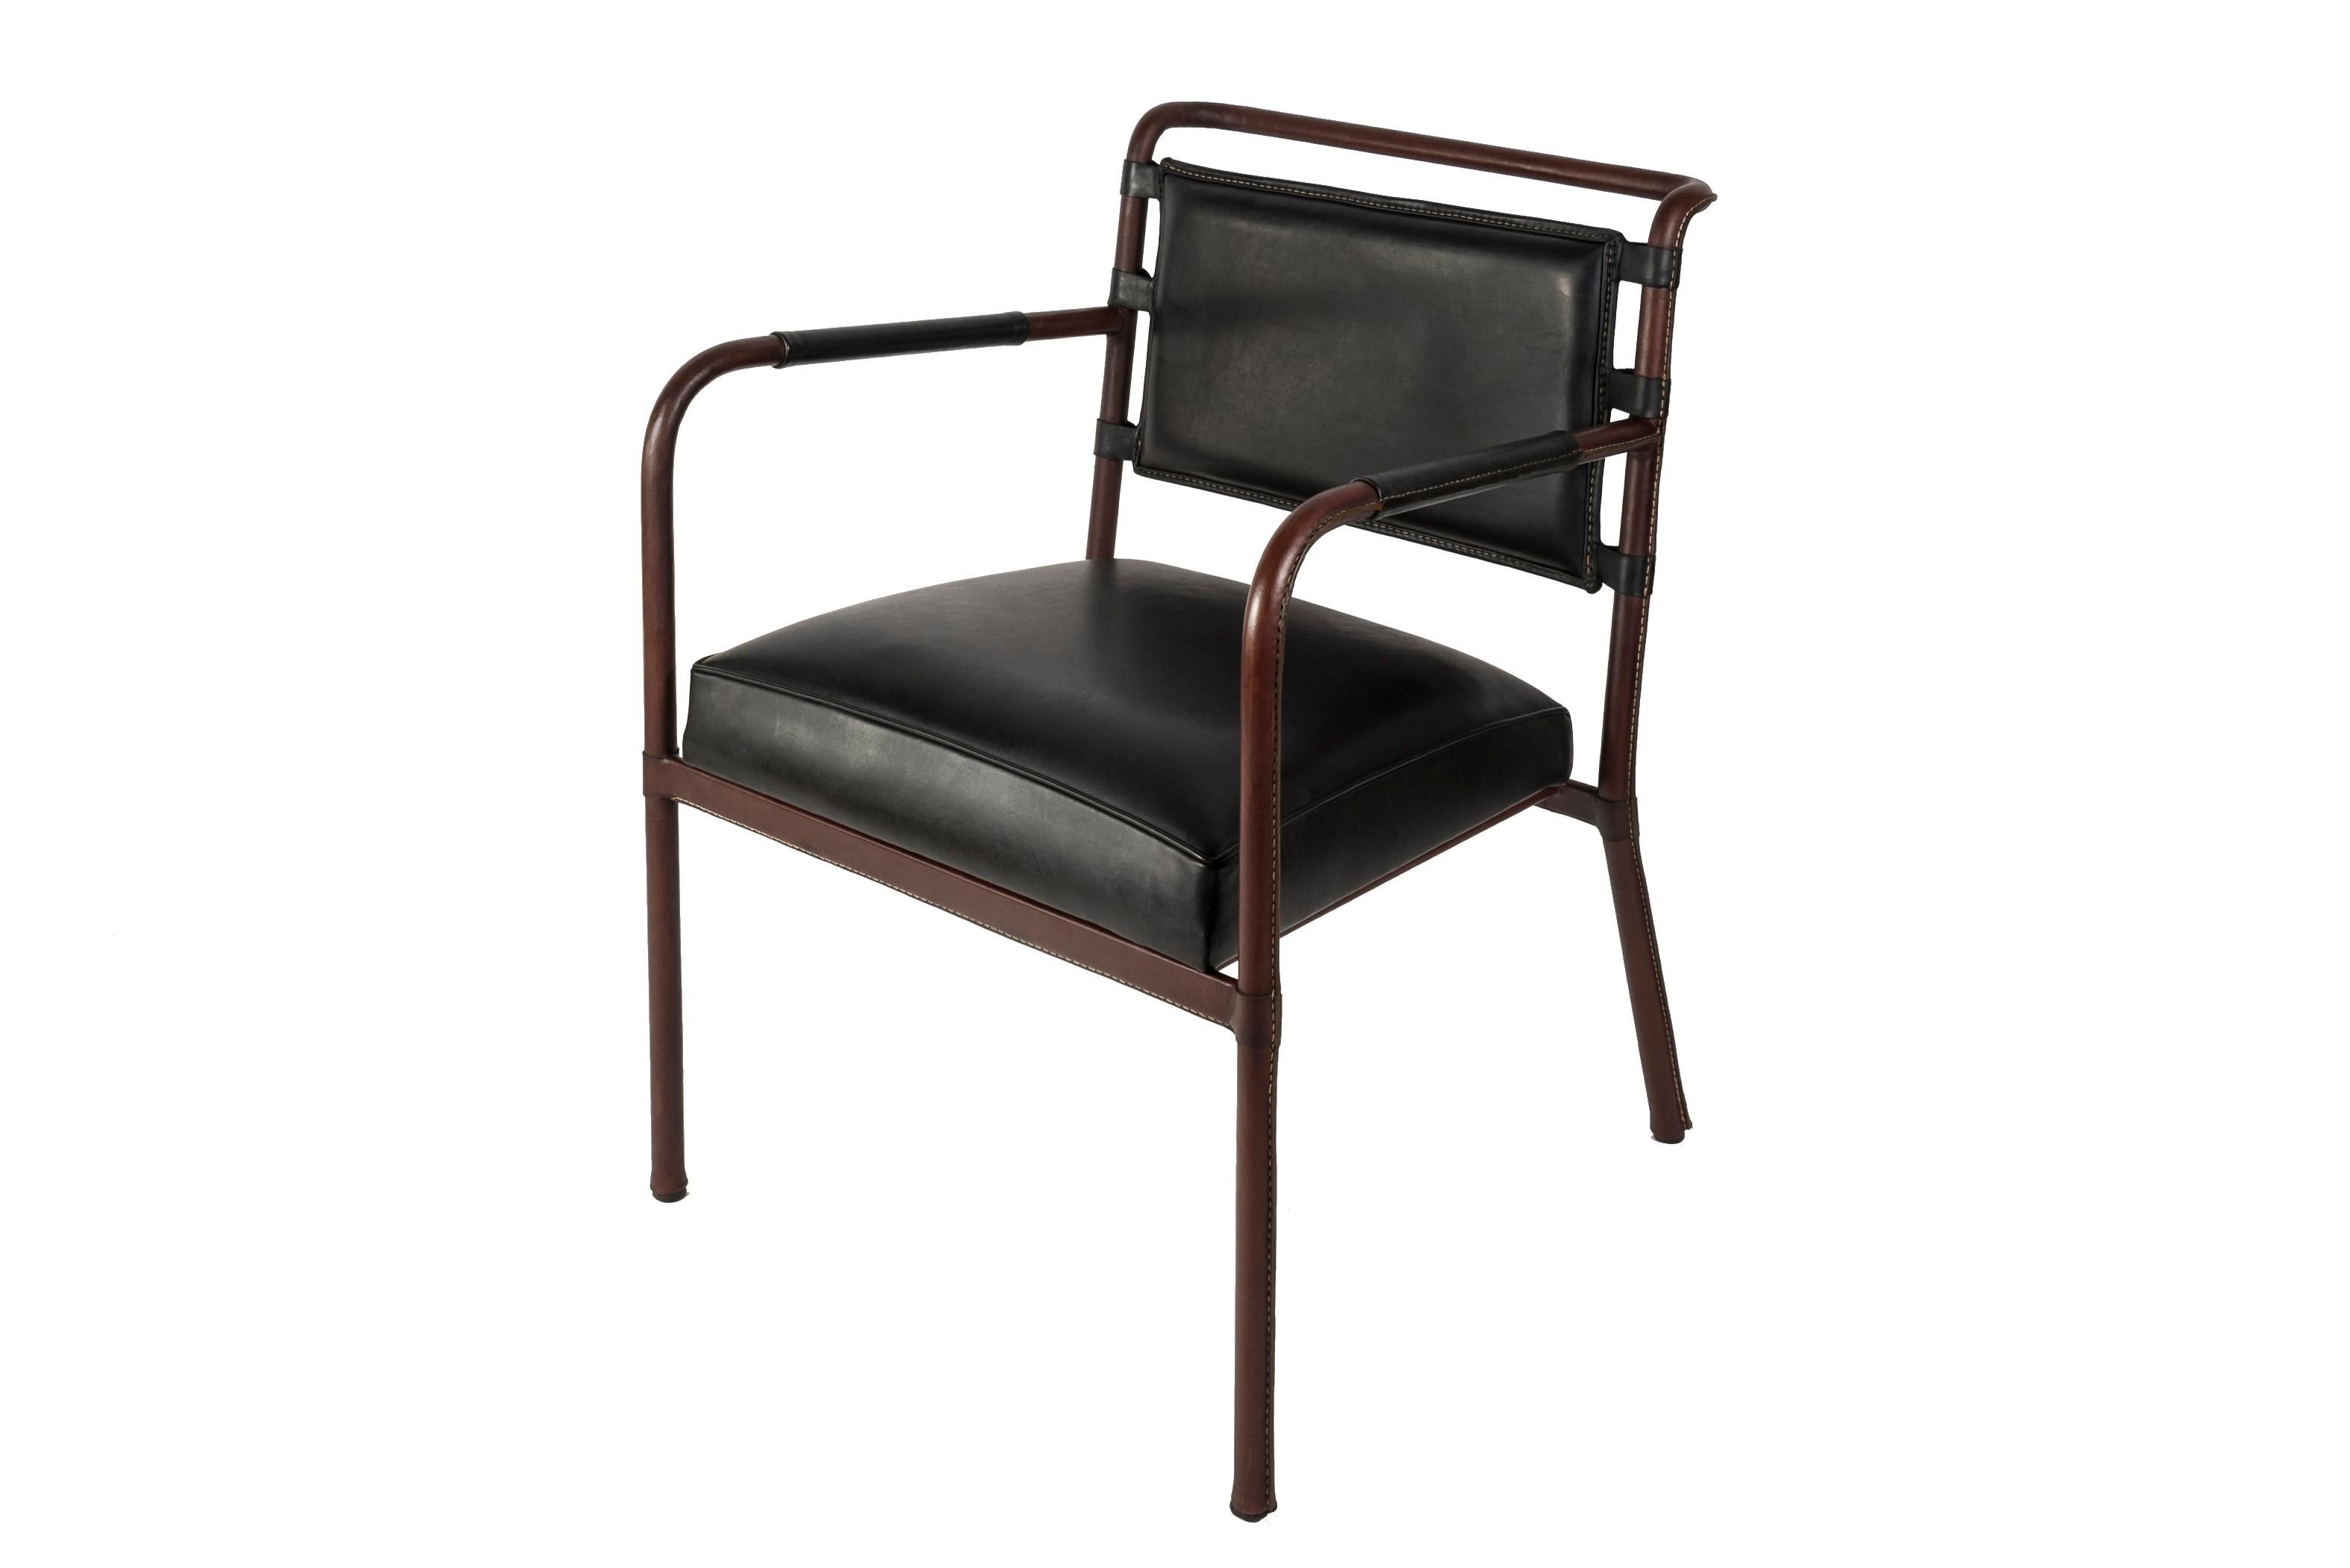 1950's Stitched Leather armchair by Jacques Adnet
France